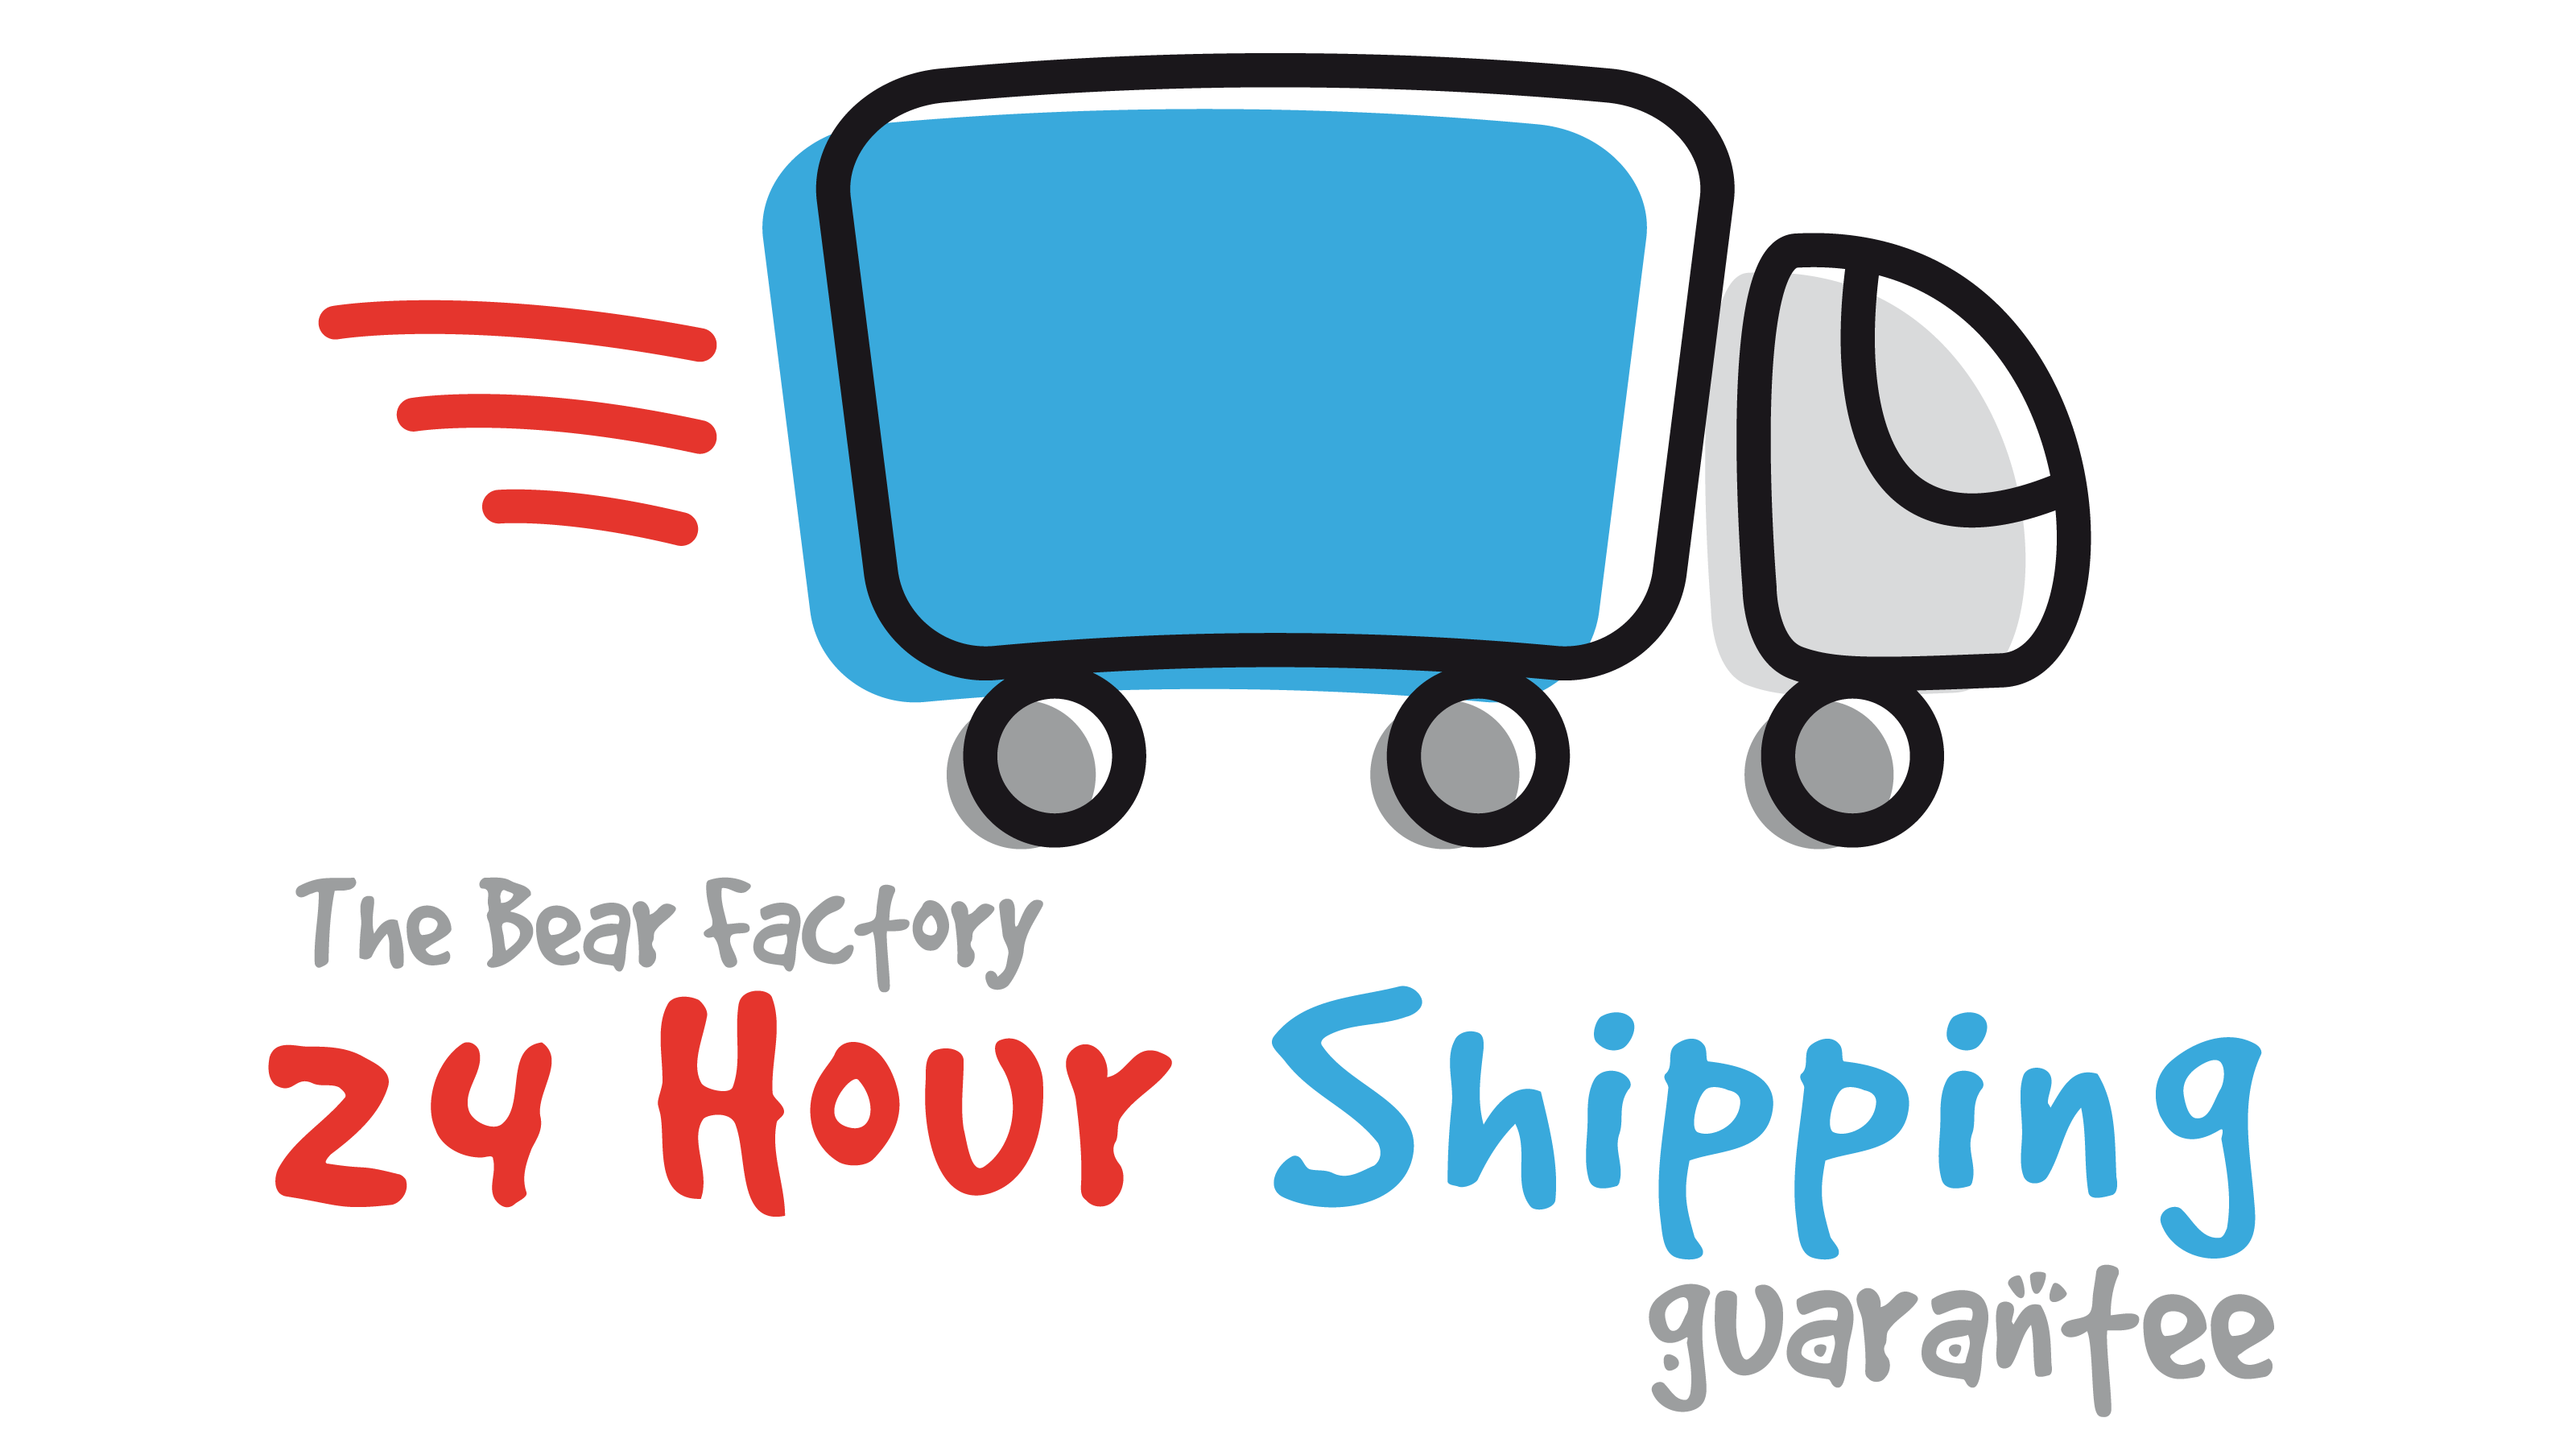 truck graphic with text that says "the bear factory 24 hours shipping guarantee." Start your Bear Factory journey